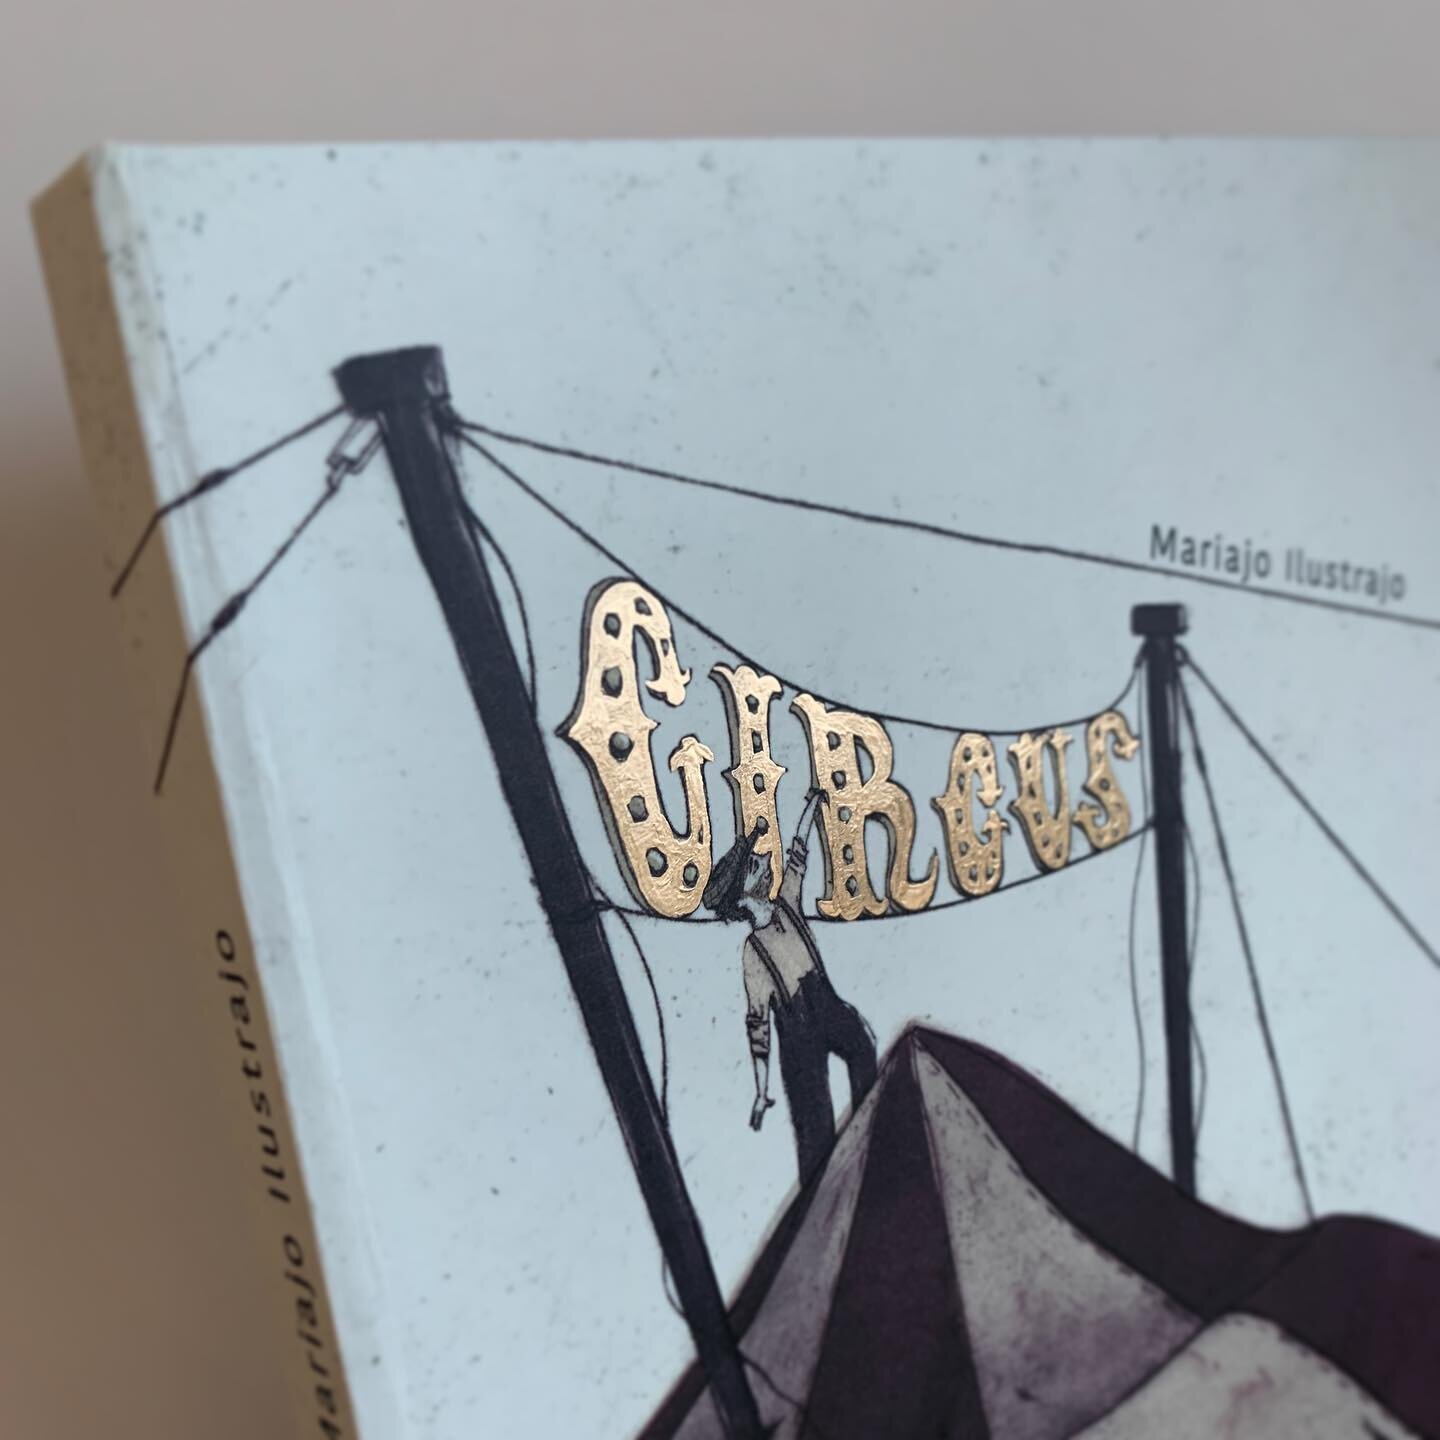 A sneak peek of my project circus 
#dummy #finalproduct #copperfoil #stampfoil #cover #box #ma #childrensbookillustration #machildrensbookillustration #picturebookillustration #picturebook #drypoint #monoprint #printingpress #circus #illustration #il